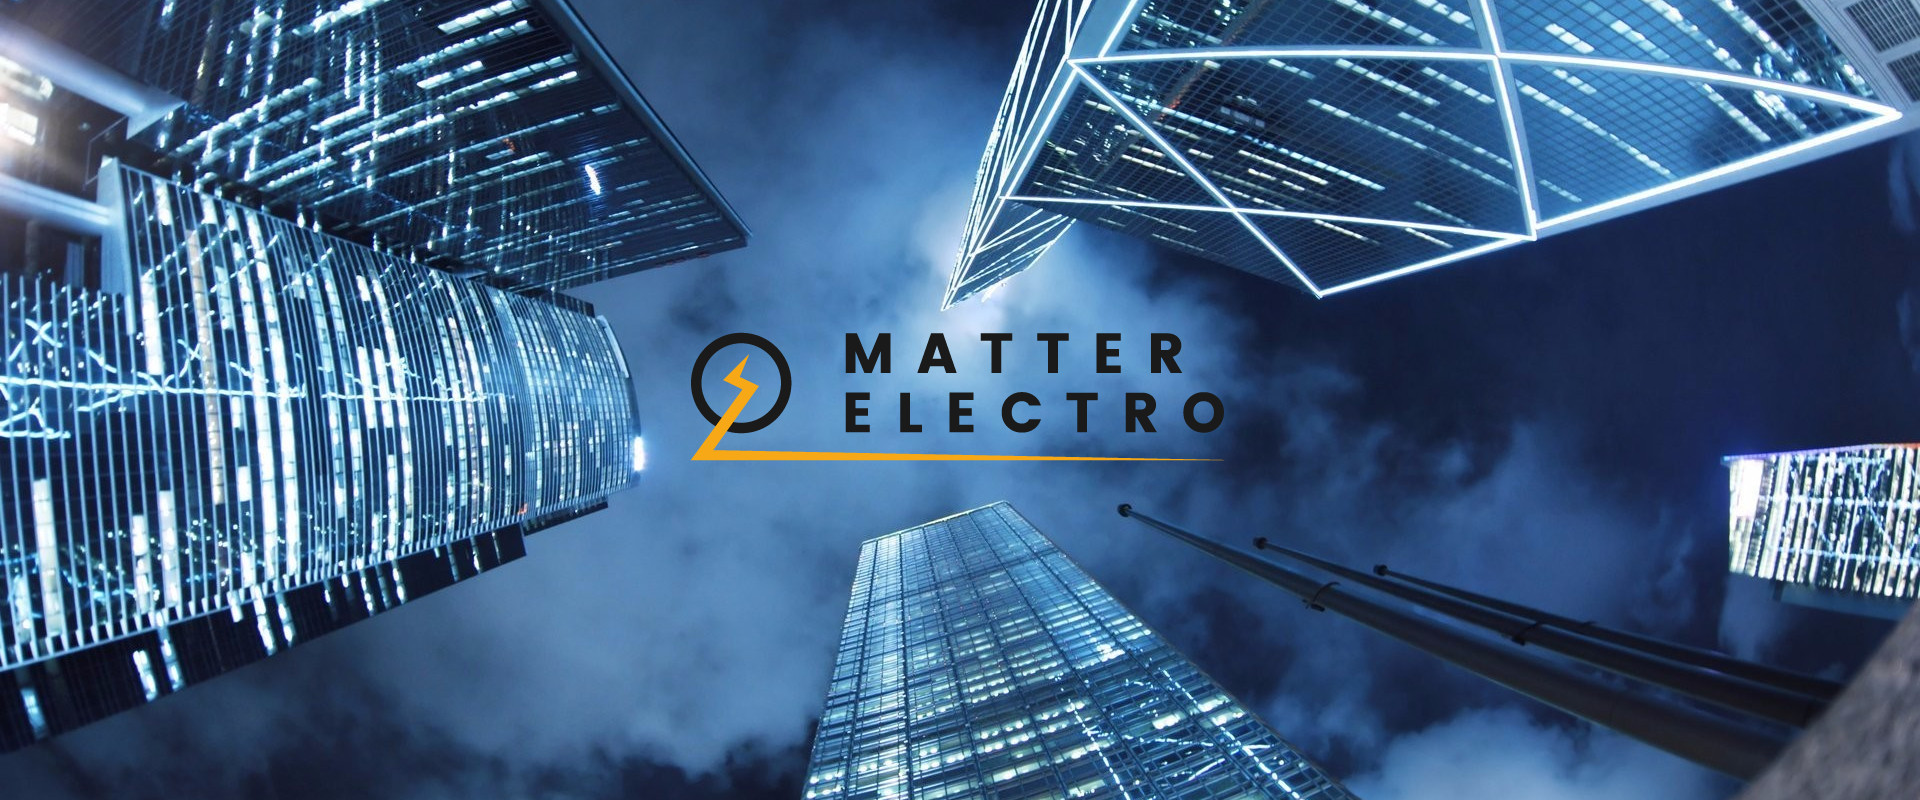 Matter Electro - electrical company